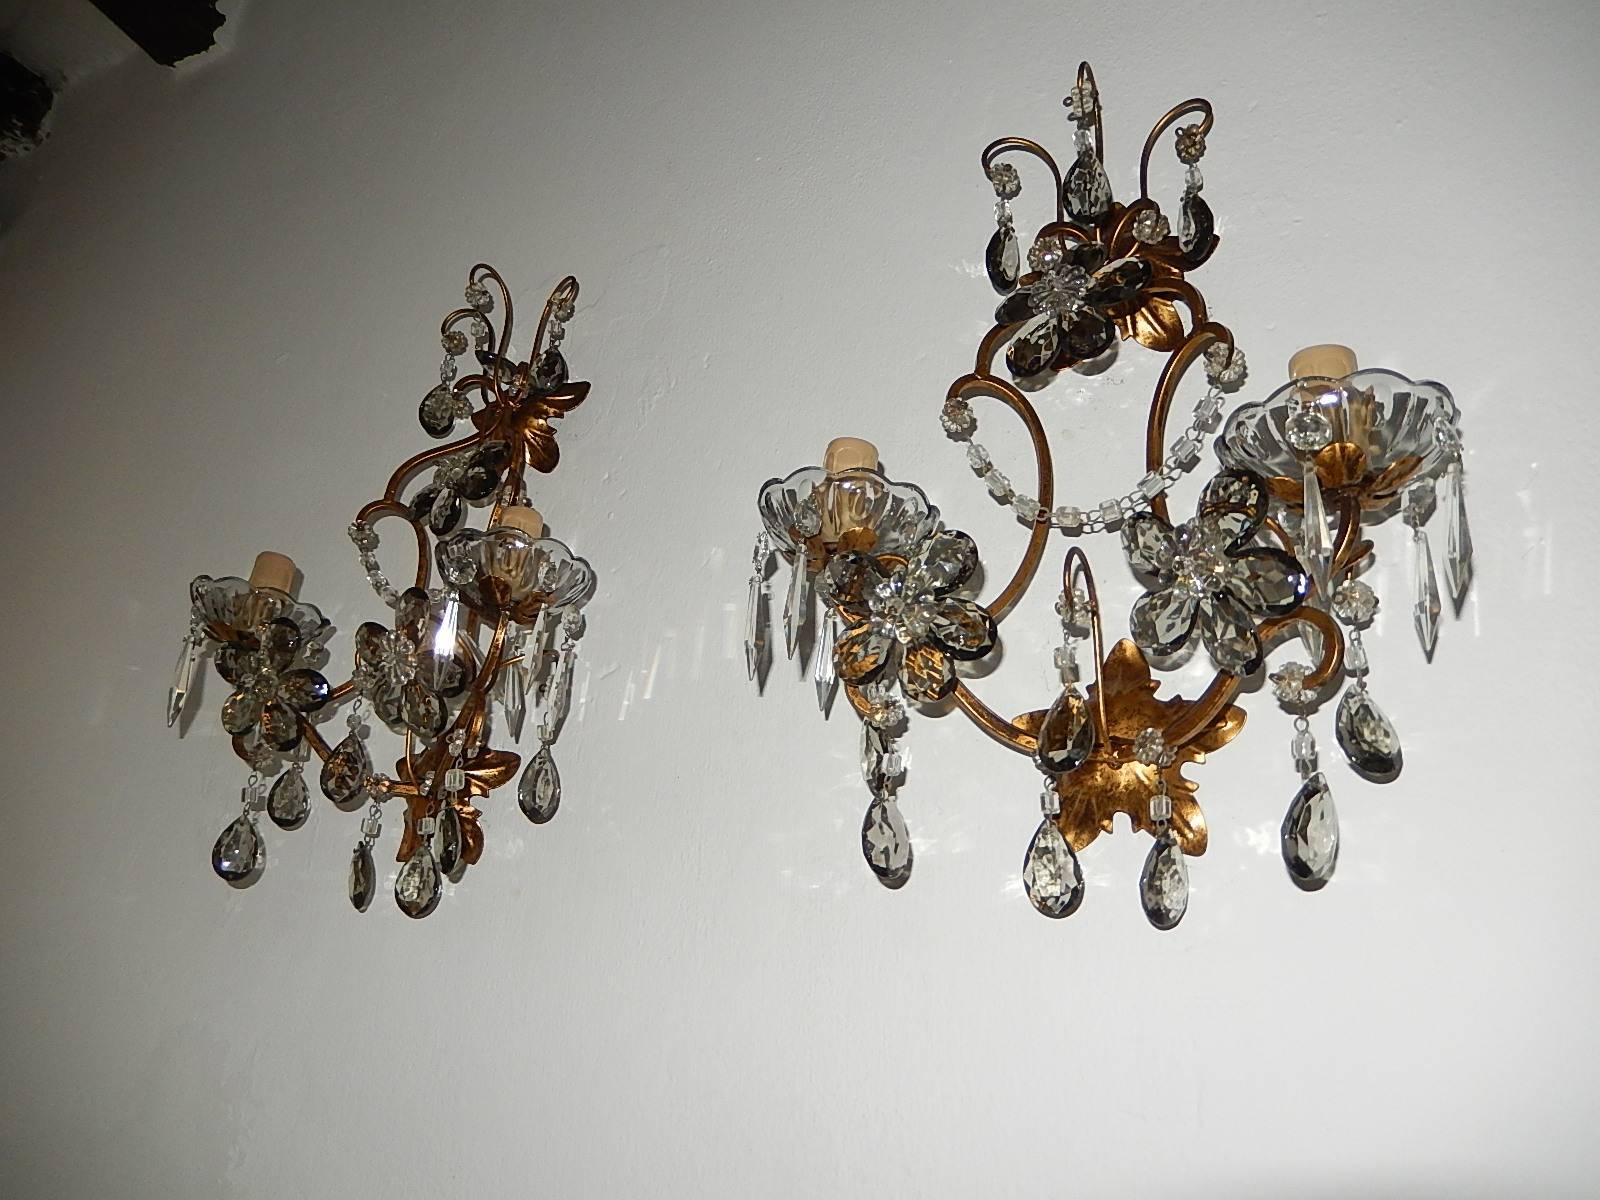 Housing two lights each, sitting in crystal fume (smoke) color bobeches with crystals. Gold metal body with florets throughout. Adorning flowers made of crystals. Rewired and ready to hang. Free priority shipping from Italy.